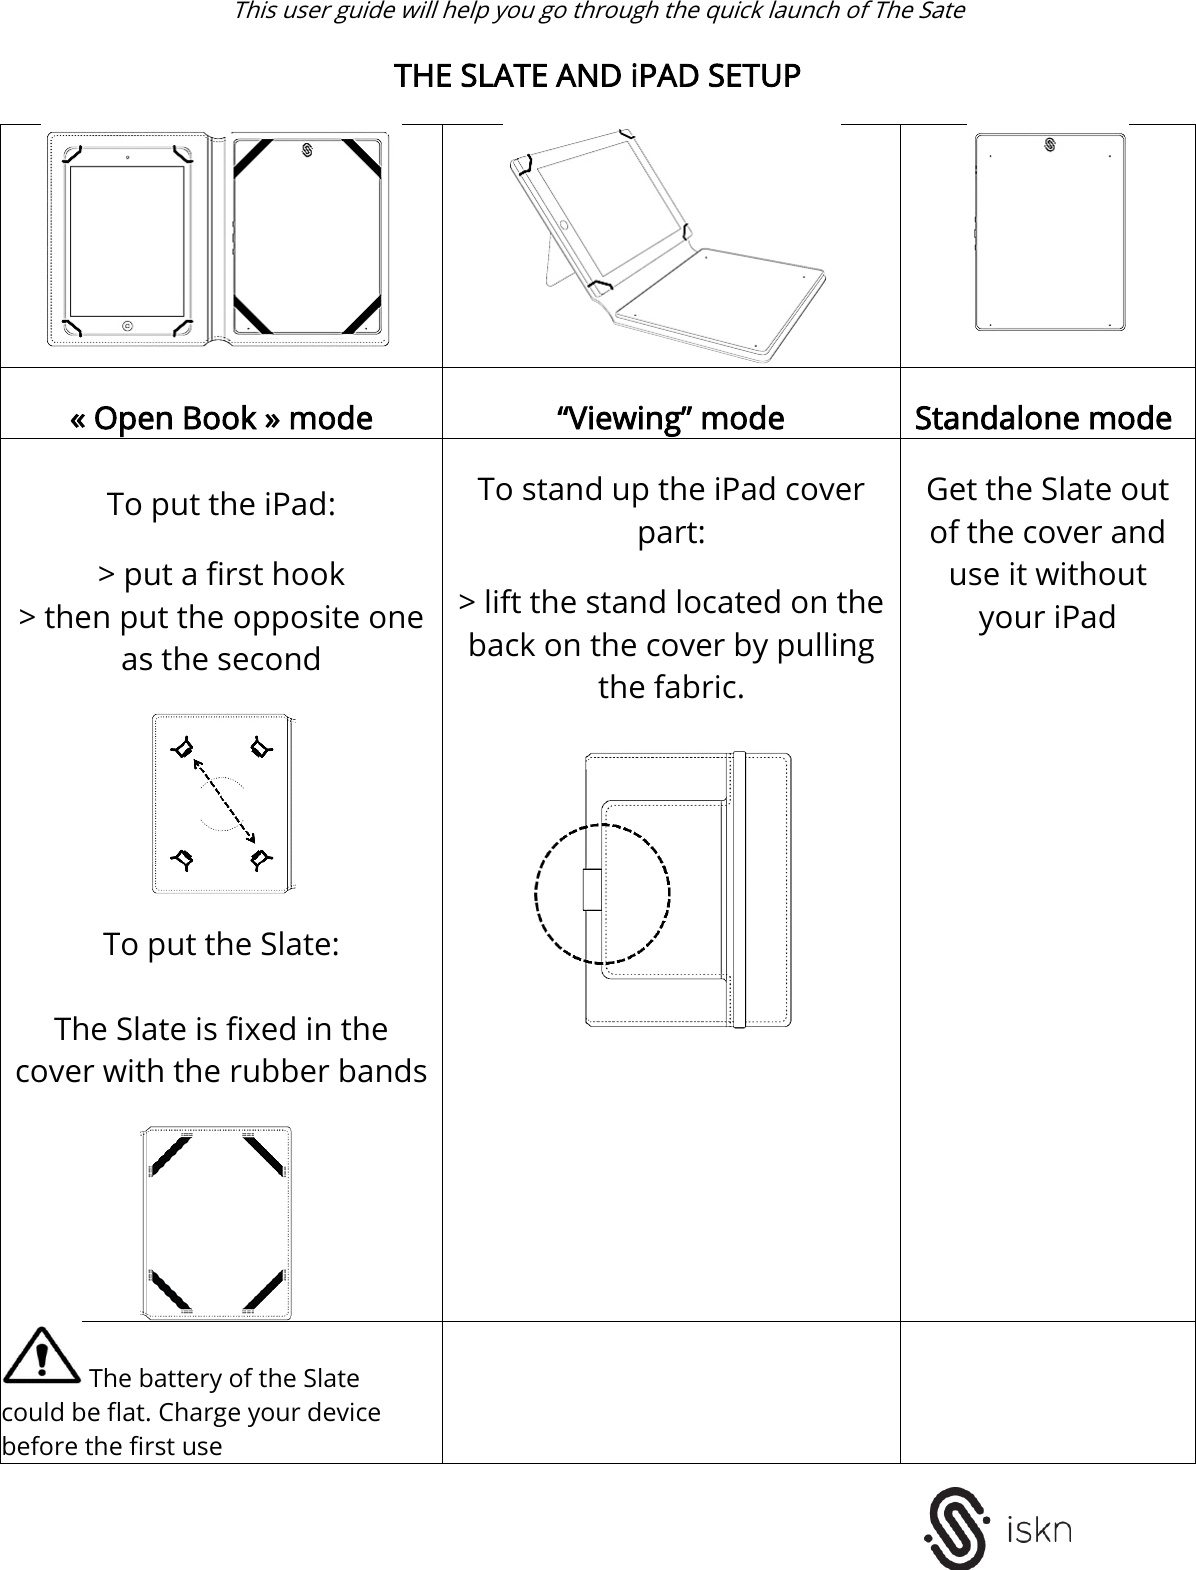  This user guide will help you go through the quick launch of The Sate   THE SLATE AND iPAD SETUP      « Open Book » mode  “Viewing” mode  Standalone mode   To put the iPad:  &gt; put a first hook &gt; then put the opposite one as the second    To put the Slate:  The Slate is fixed in the cover with the rubber bands    To stand up the iPad cover part:  &gt; lift the stand located on the back on the cover by pulling the fabric.    Get the Slate out of the cover and use it without your iPad  The battery of the Slate could be flat. Charge your device before the first use   